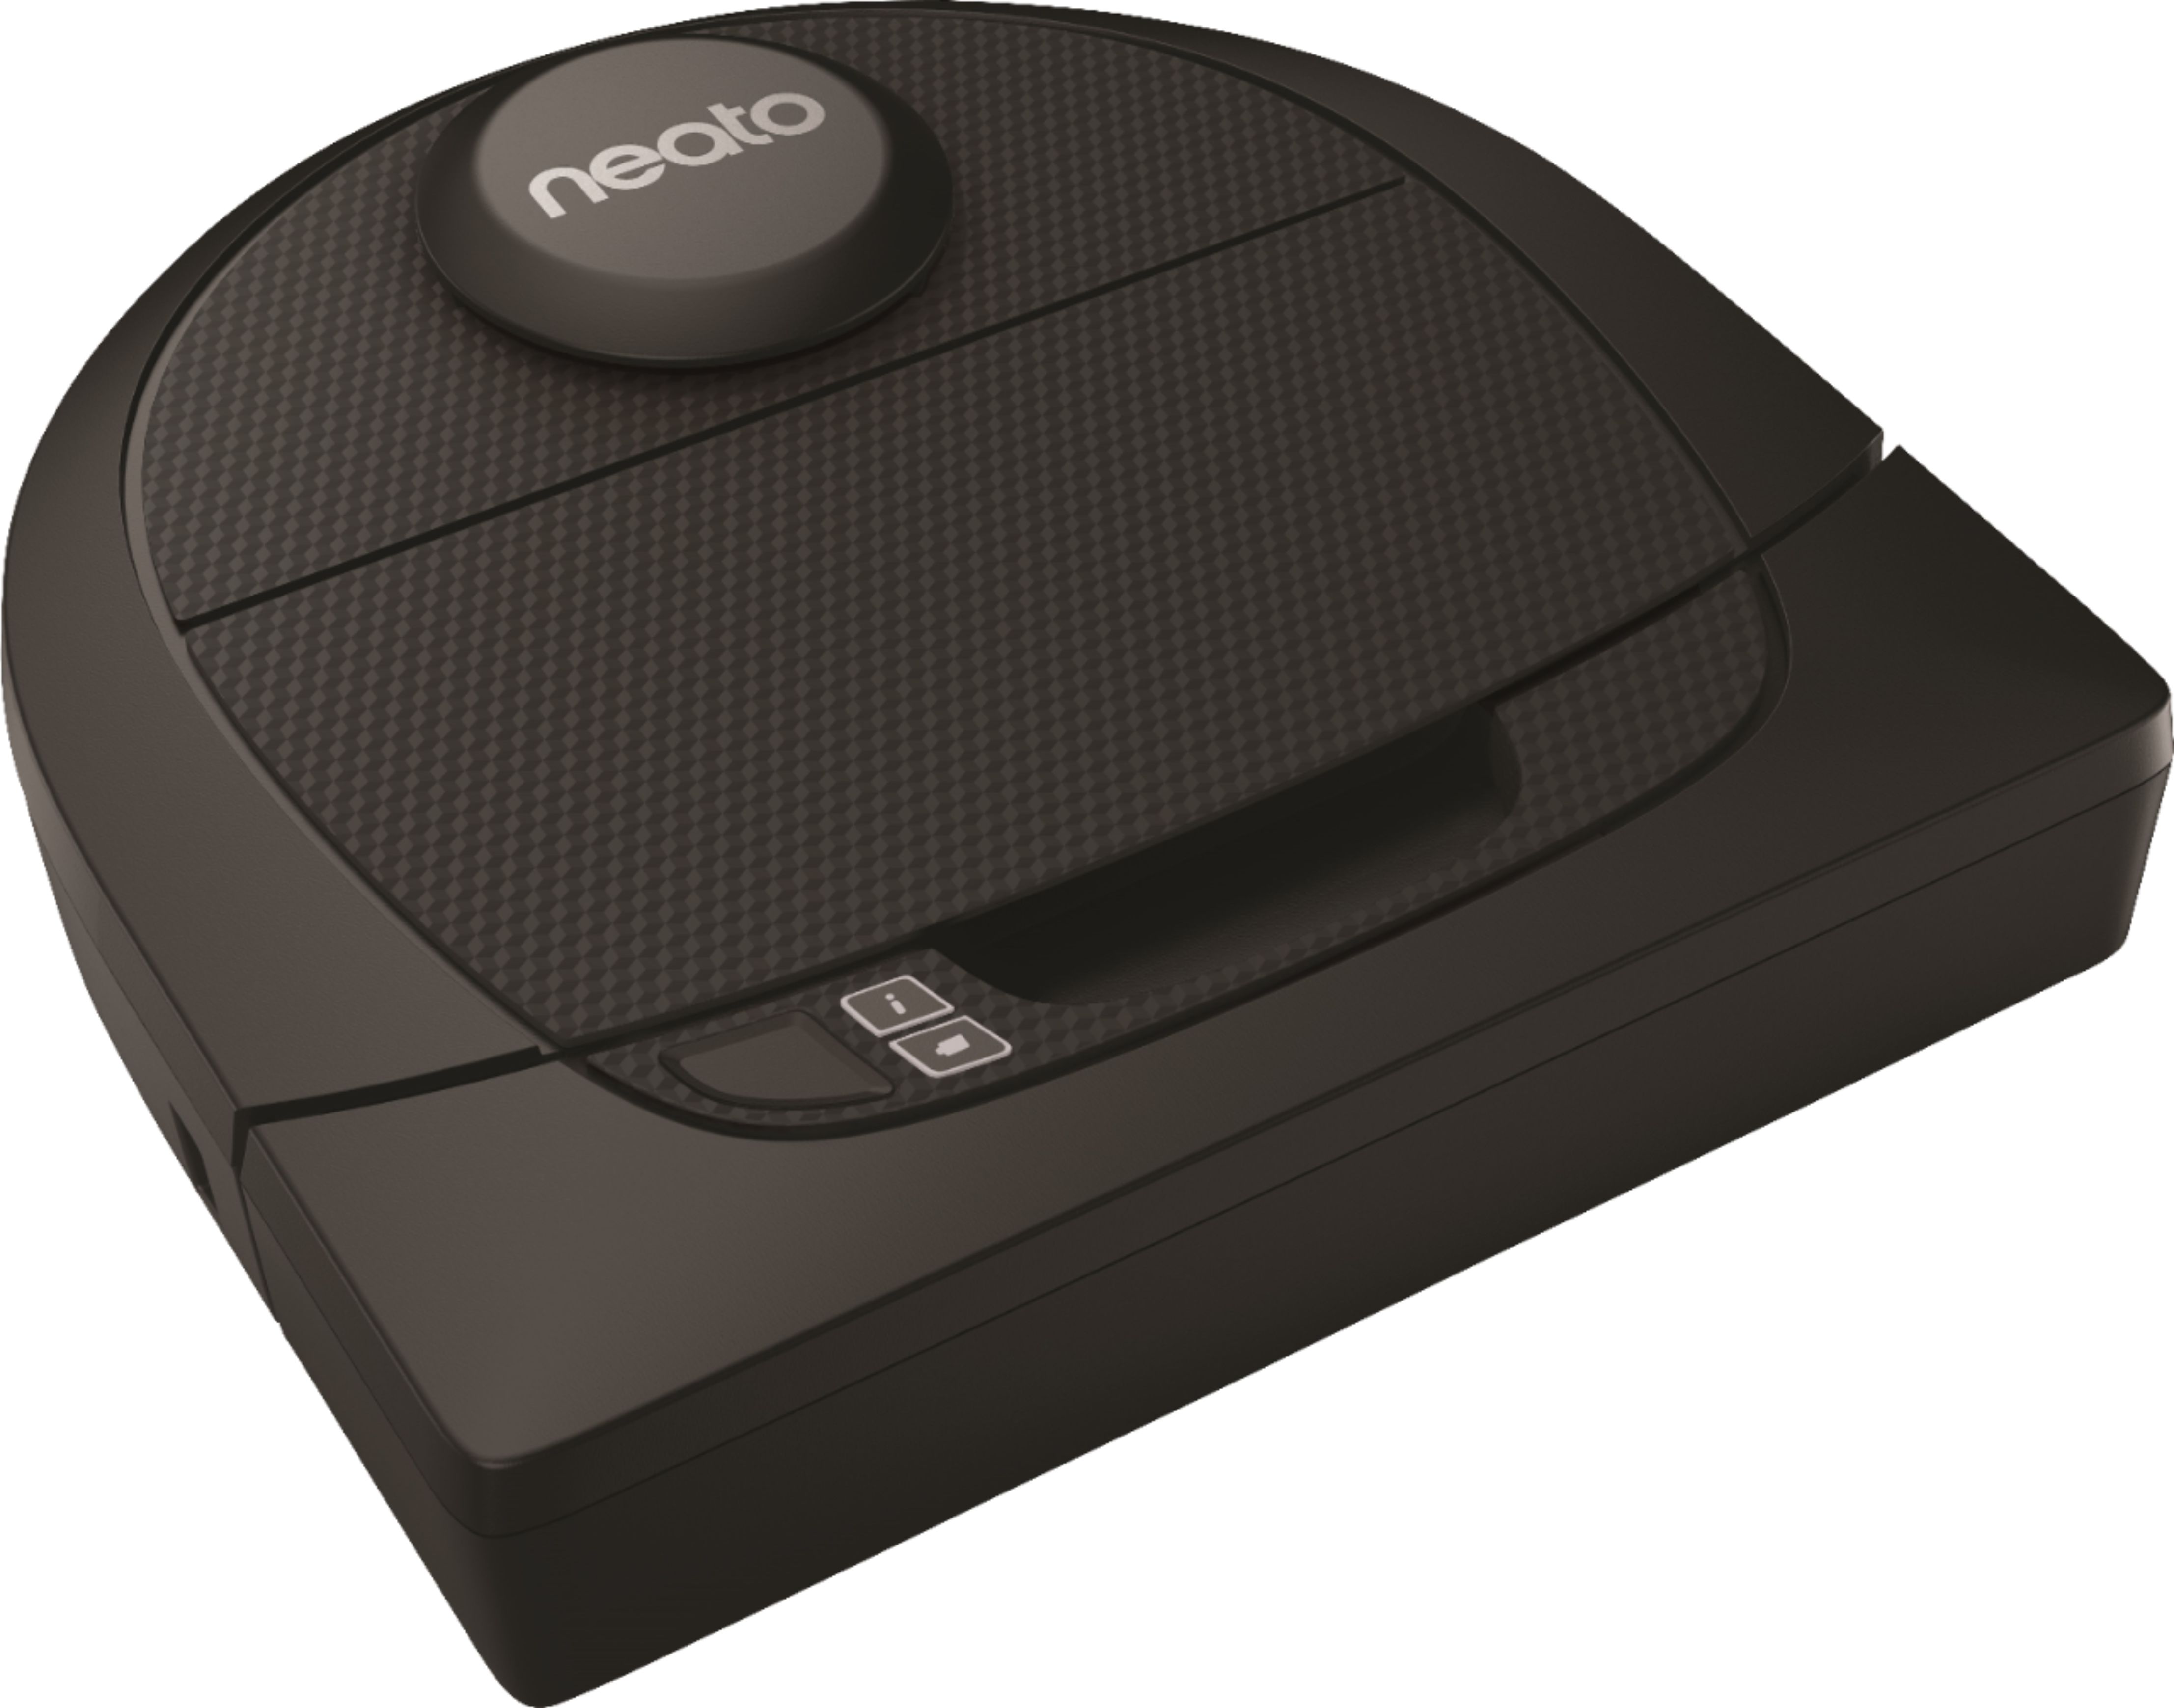 Angle View: Neato Robotics - Botvac D4 Wi-Fi Connected Robot Vacuum - Black With Honeycomb Pattern